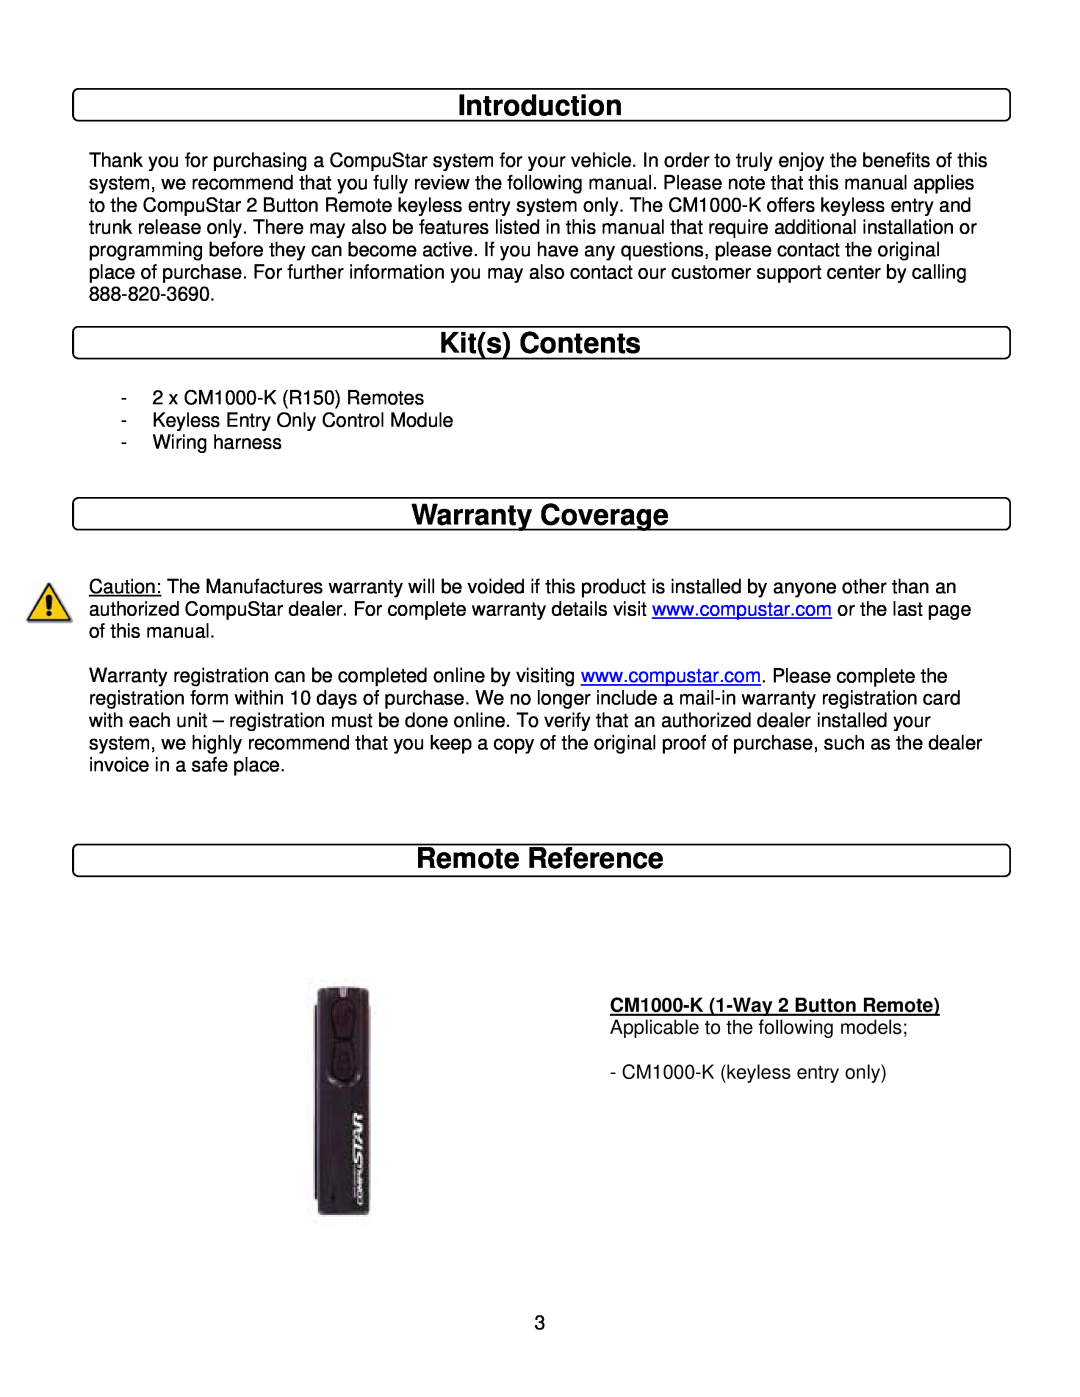 CompuSTAR user manual Introduction, Kits Contents, Warranty Coverage, Remote Reference, CM1000-K 1-Way2 Button Remote 